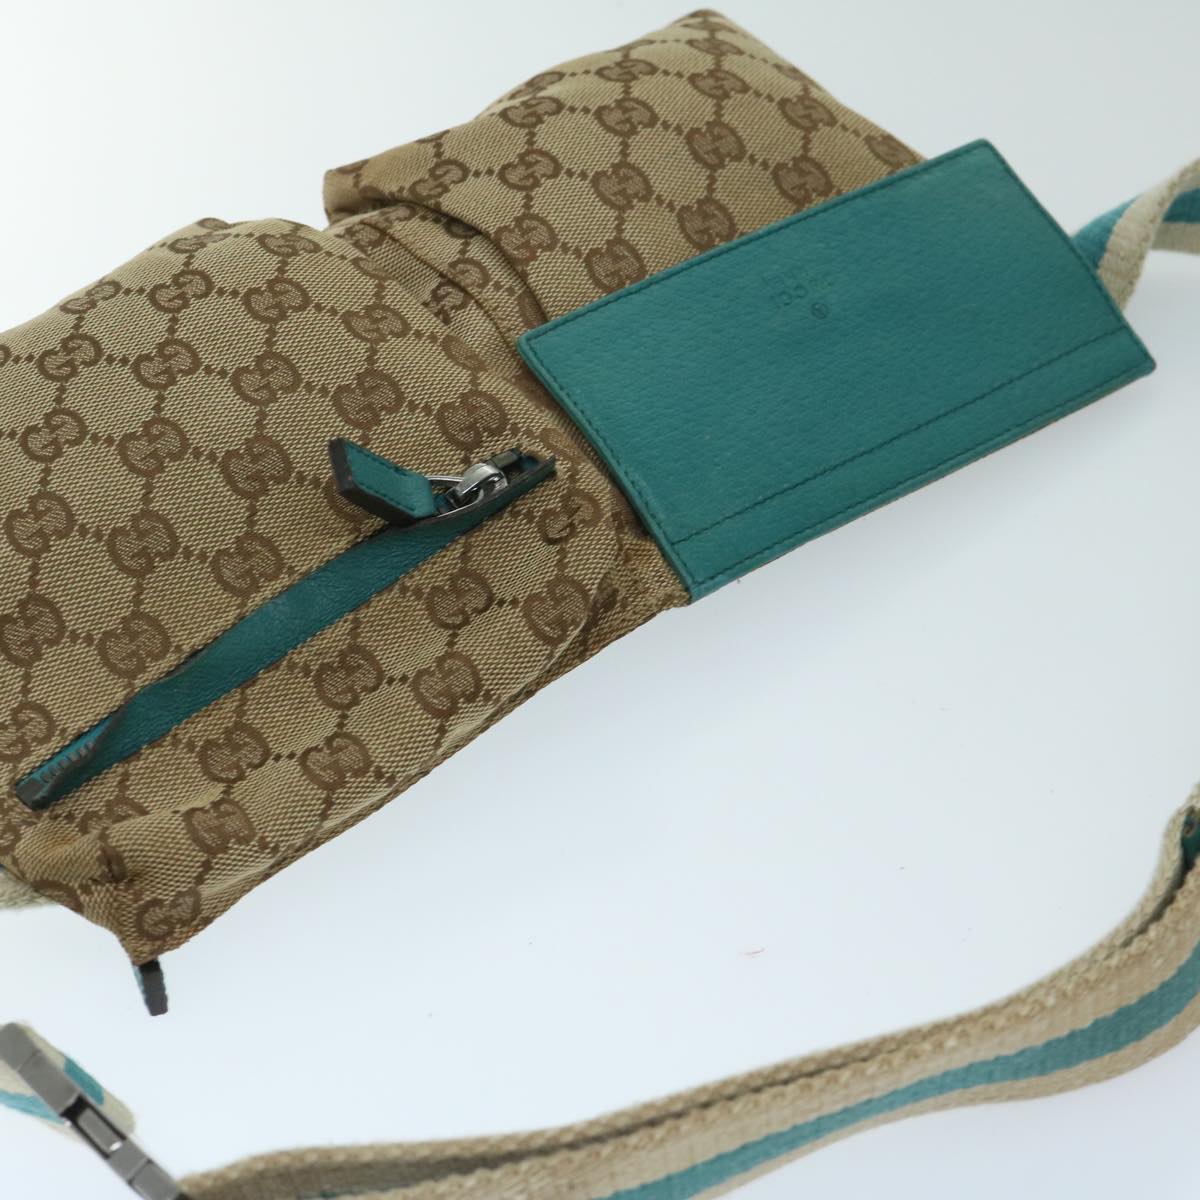 GUCCI GG Canvas Sherry Line Waist bag Beige Turquoise Blue 28566 Auth 68277